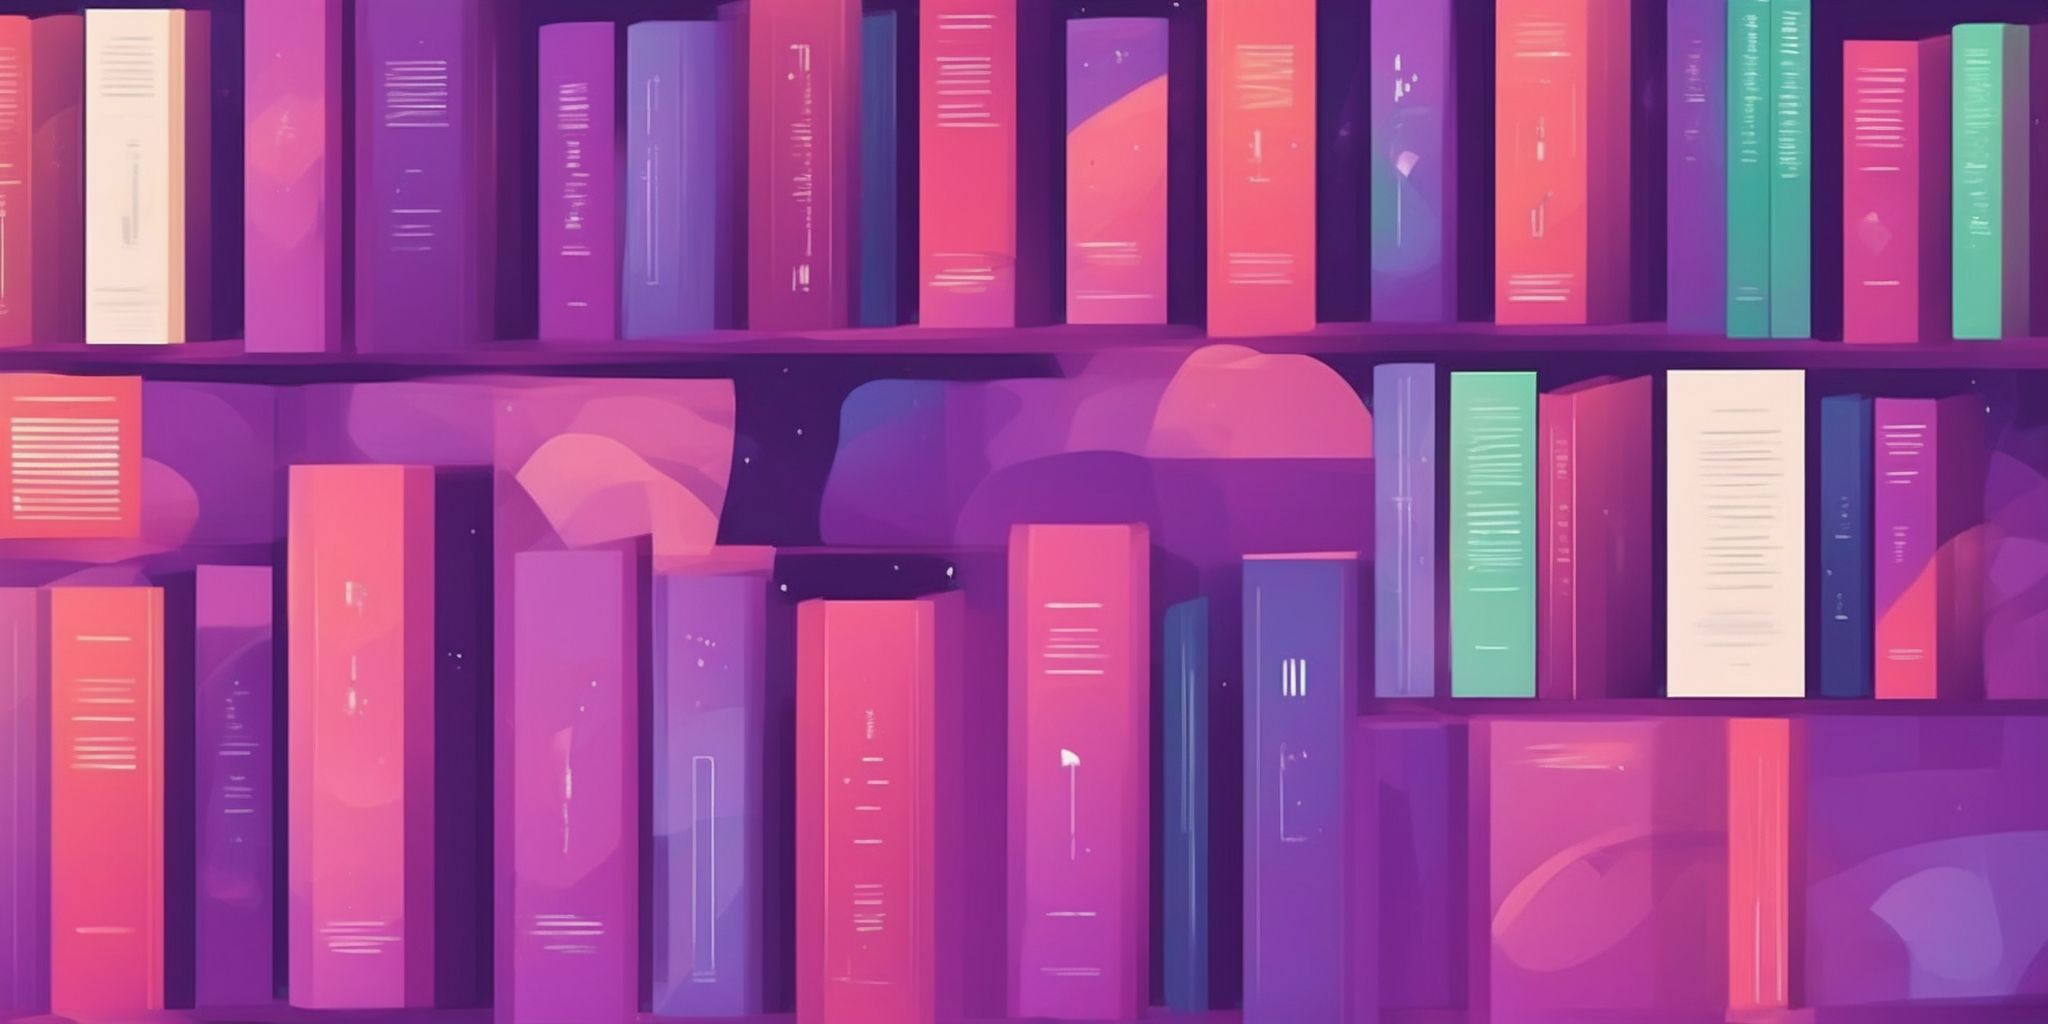 Book in flat illustration style, colorful purple gradient colors